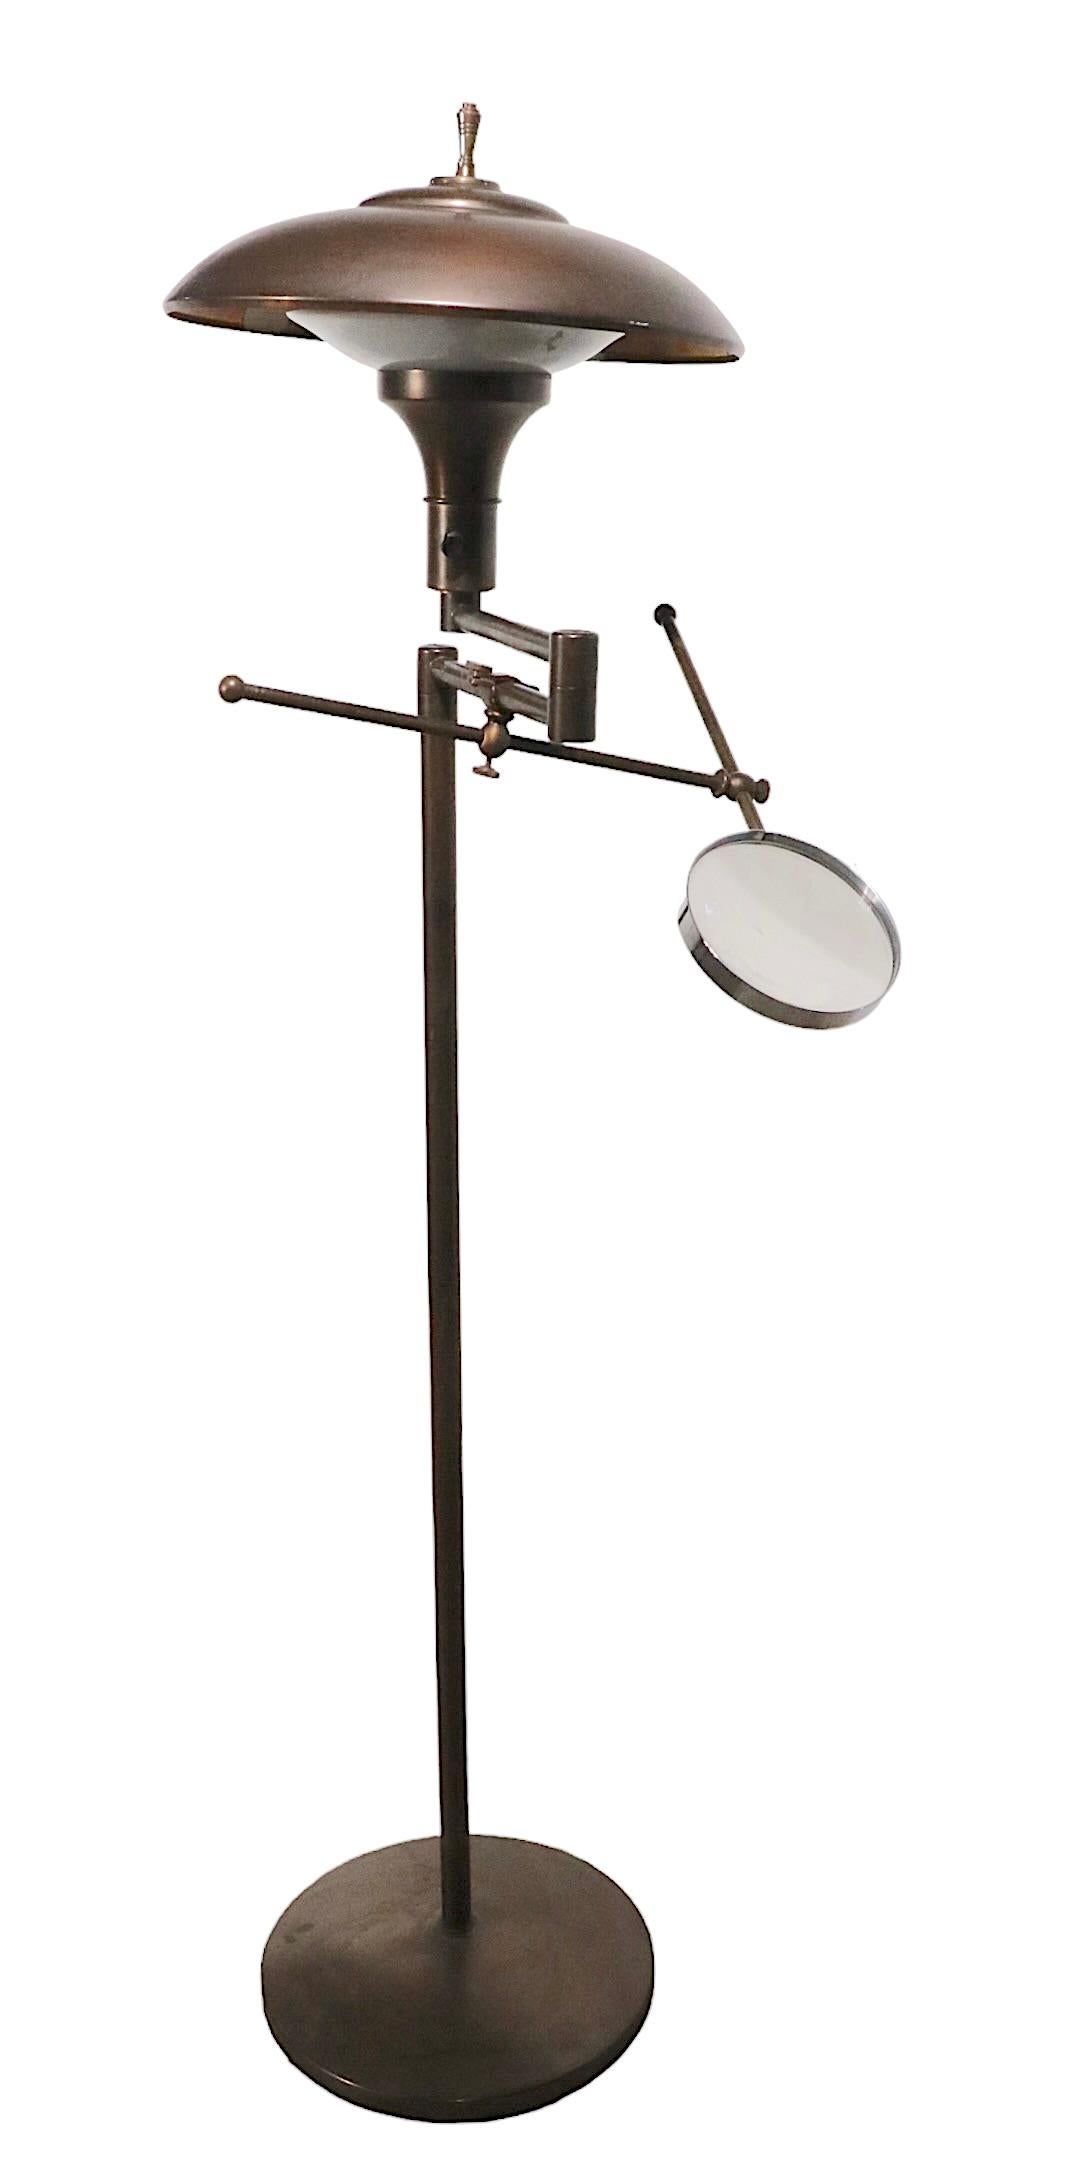 Adjustable Floor Lamp with Magnifying Glass, Faries Lamp Co. circa 1920-1940 For Sale 4